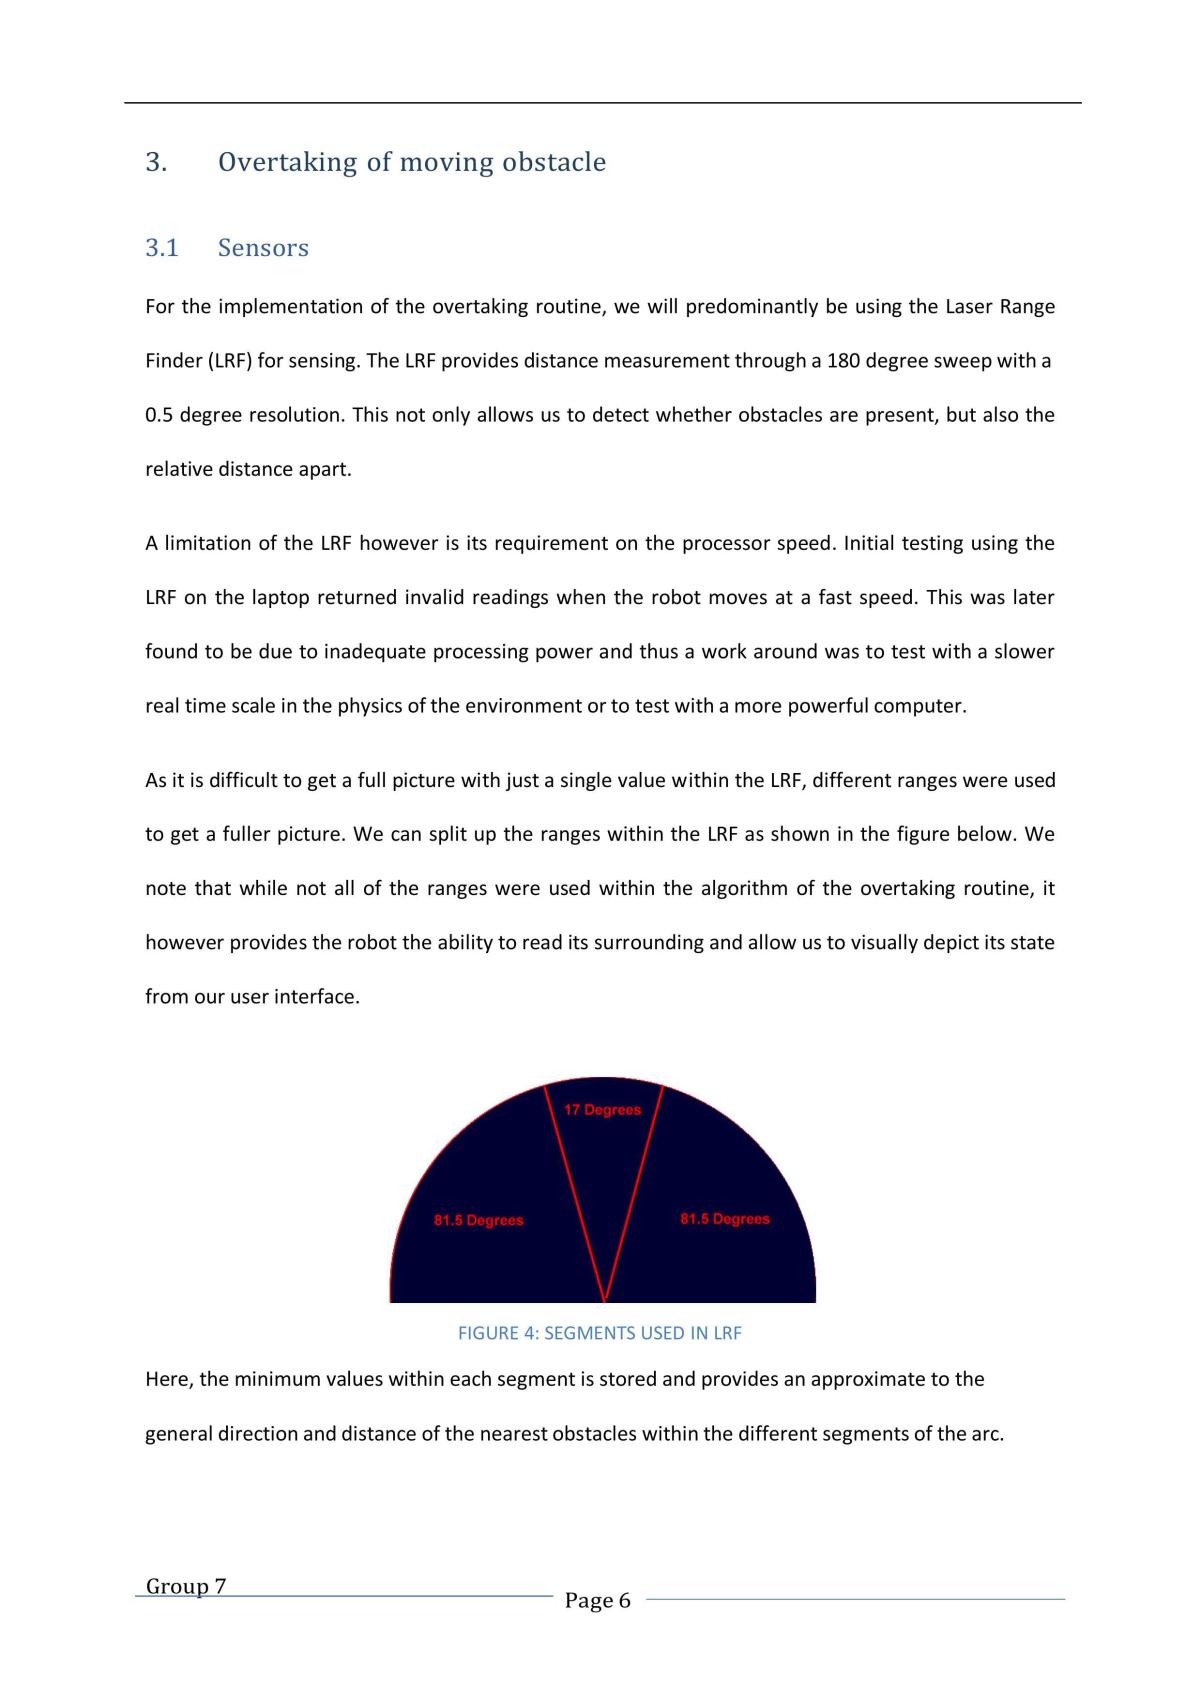 Mobile Robot Report - Page 5